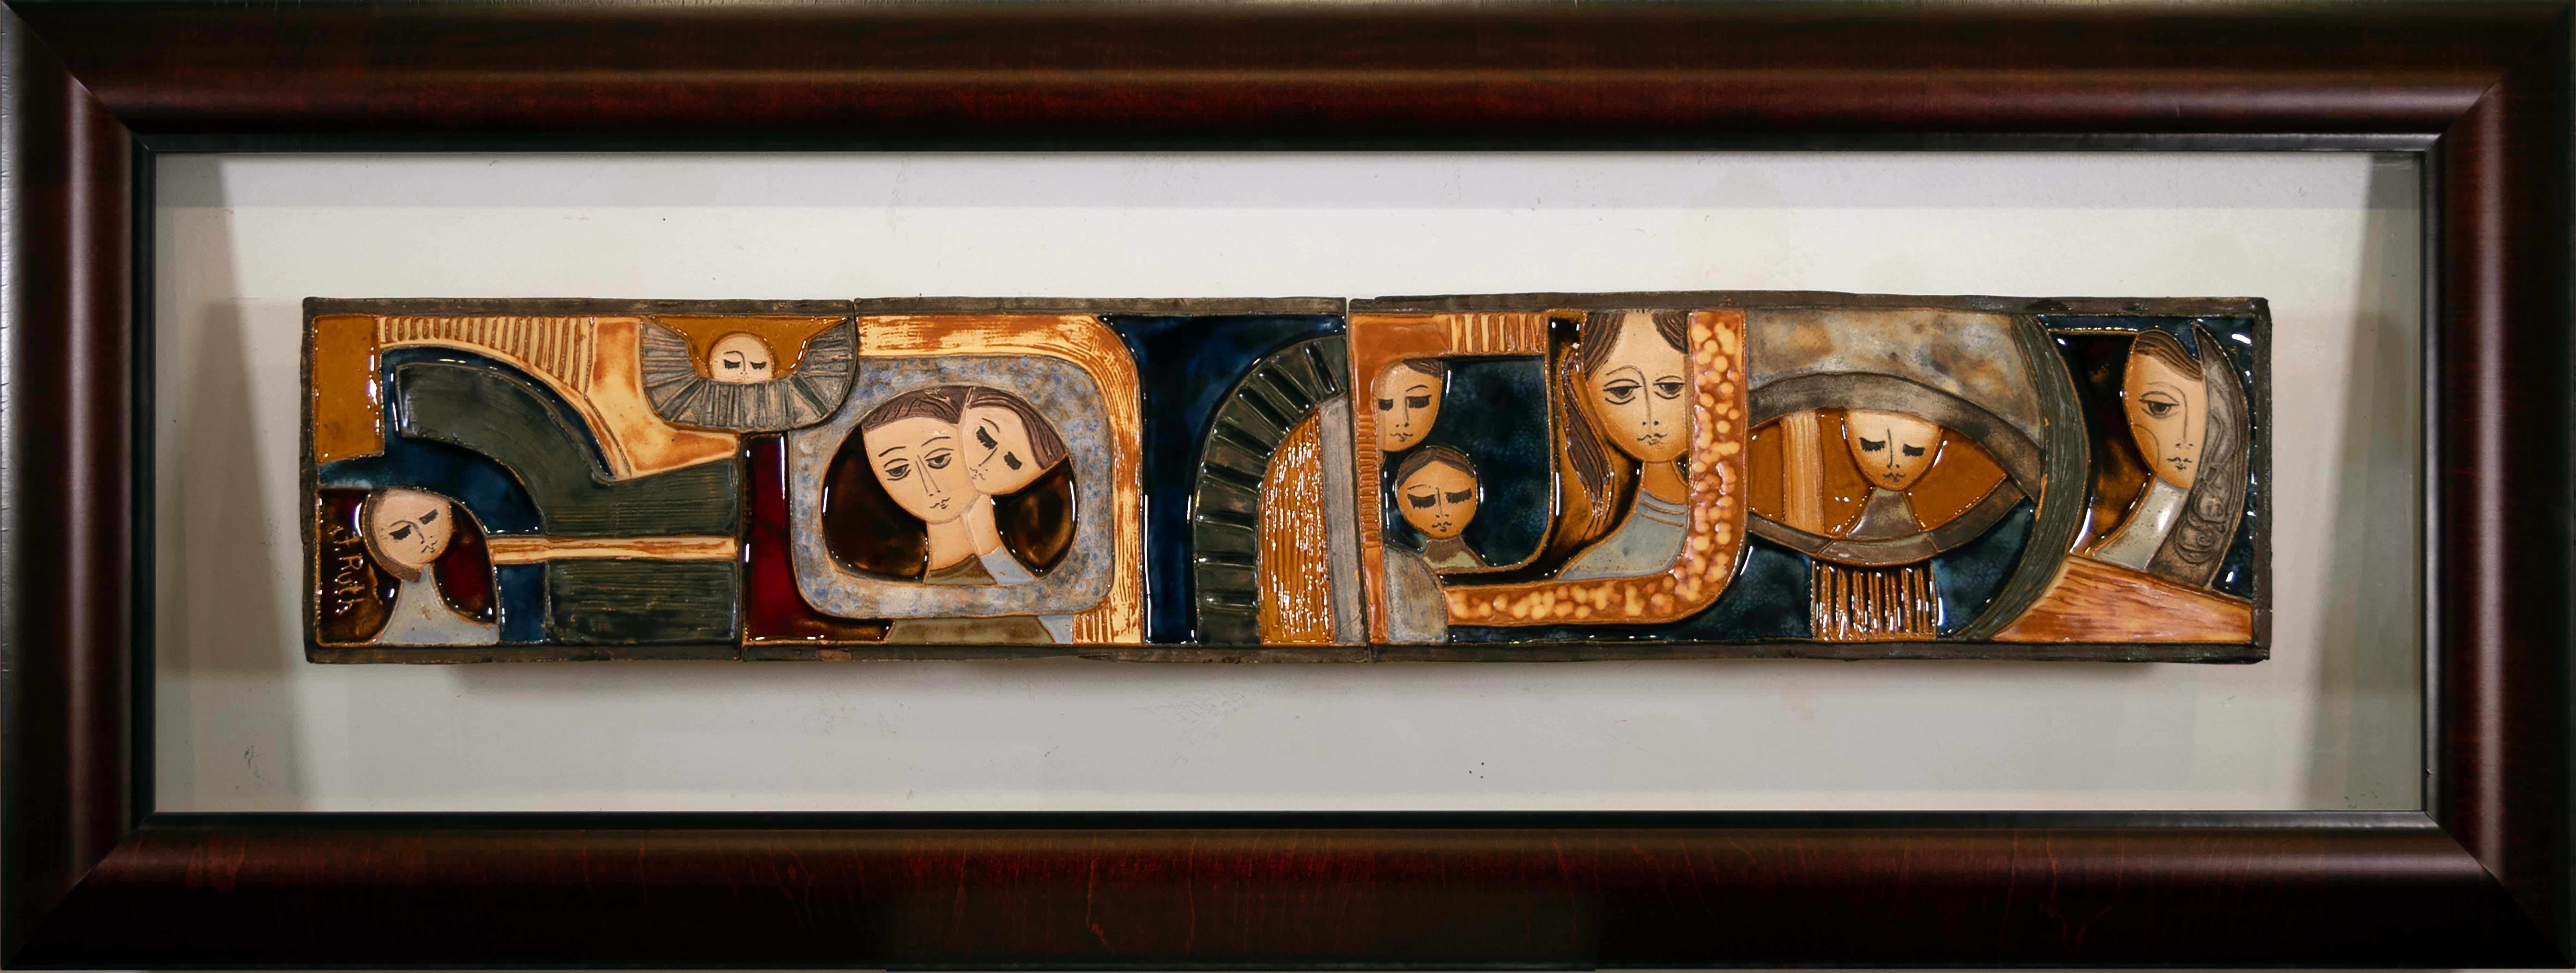 A whimsical modernist figurative ceramic tile wall art installation by Israeli artist Ruth Faktor (Faktorowicz). A unique composition with a theme of friendship. The tile was hand-painted with the artist's unique glazes. The ceramic tiles are framed